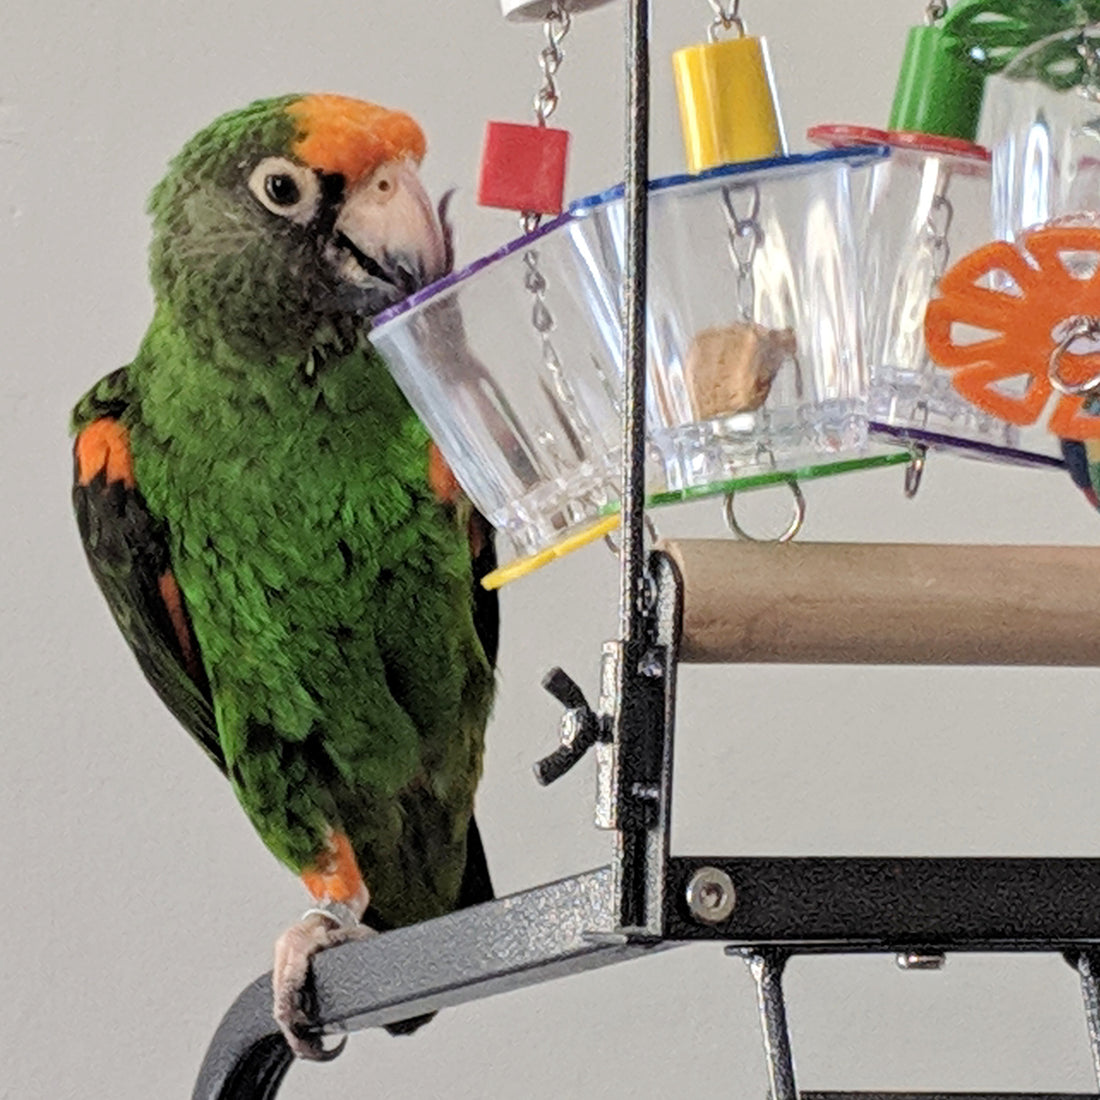 Foraging Toy Reviews